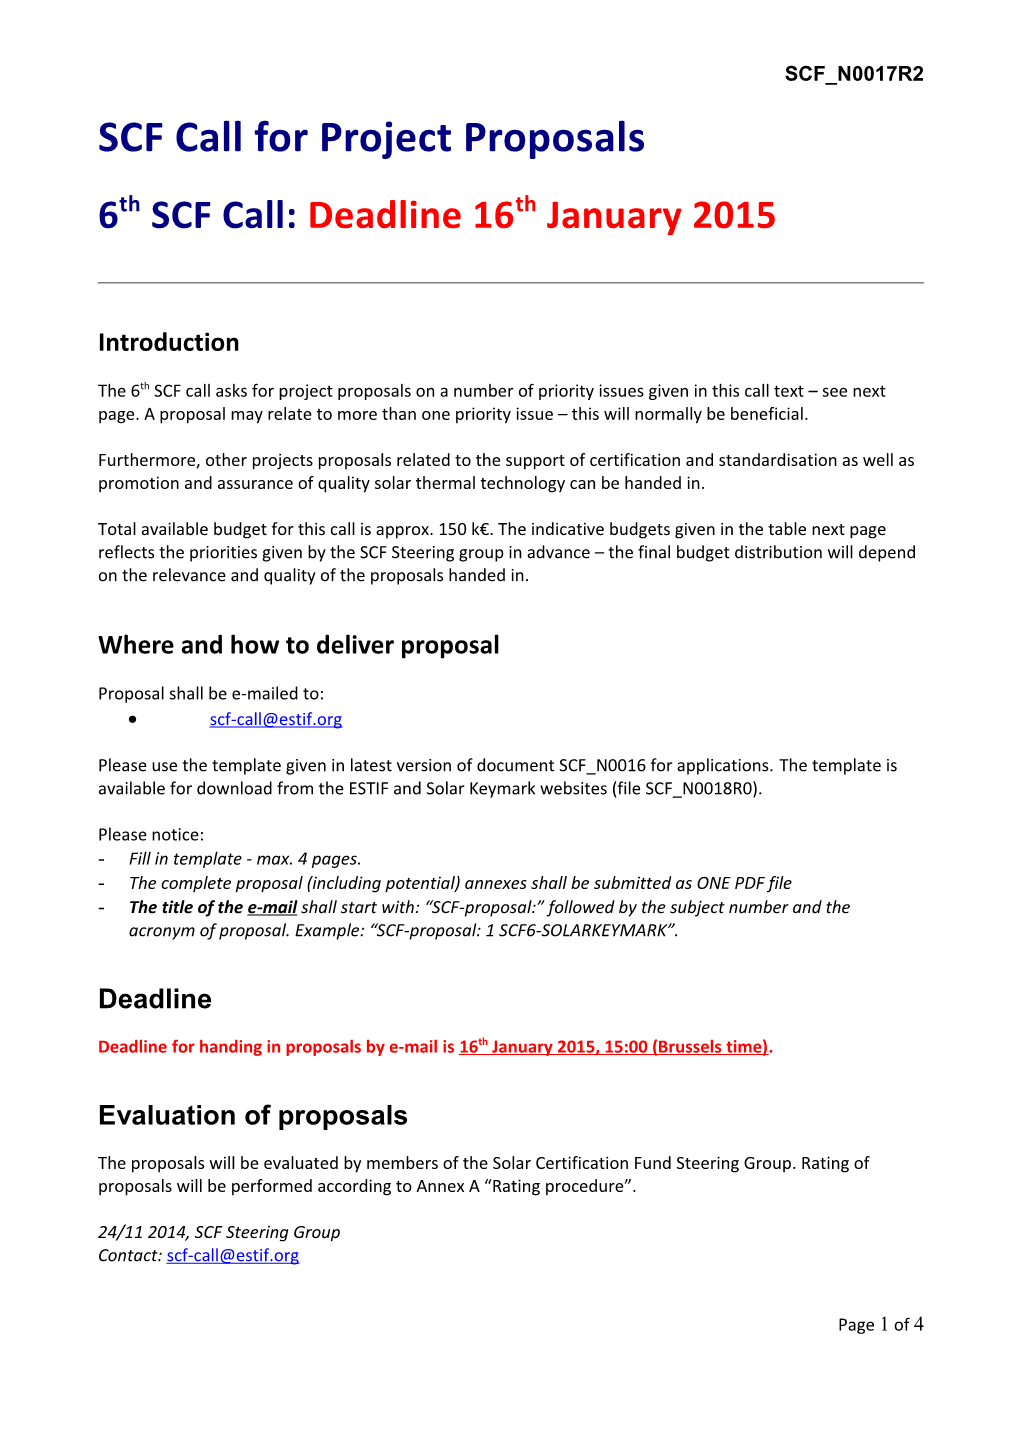 SCF Call for Project Proposals